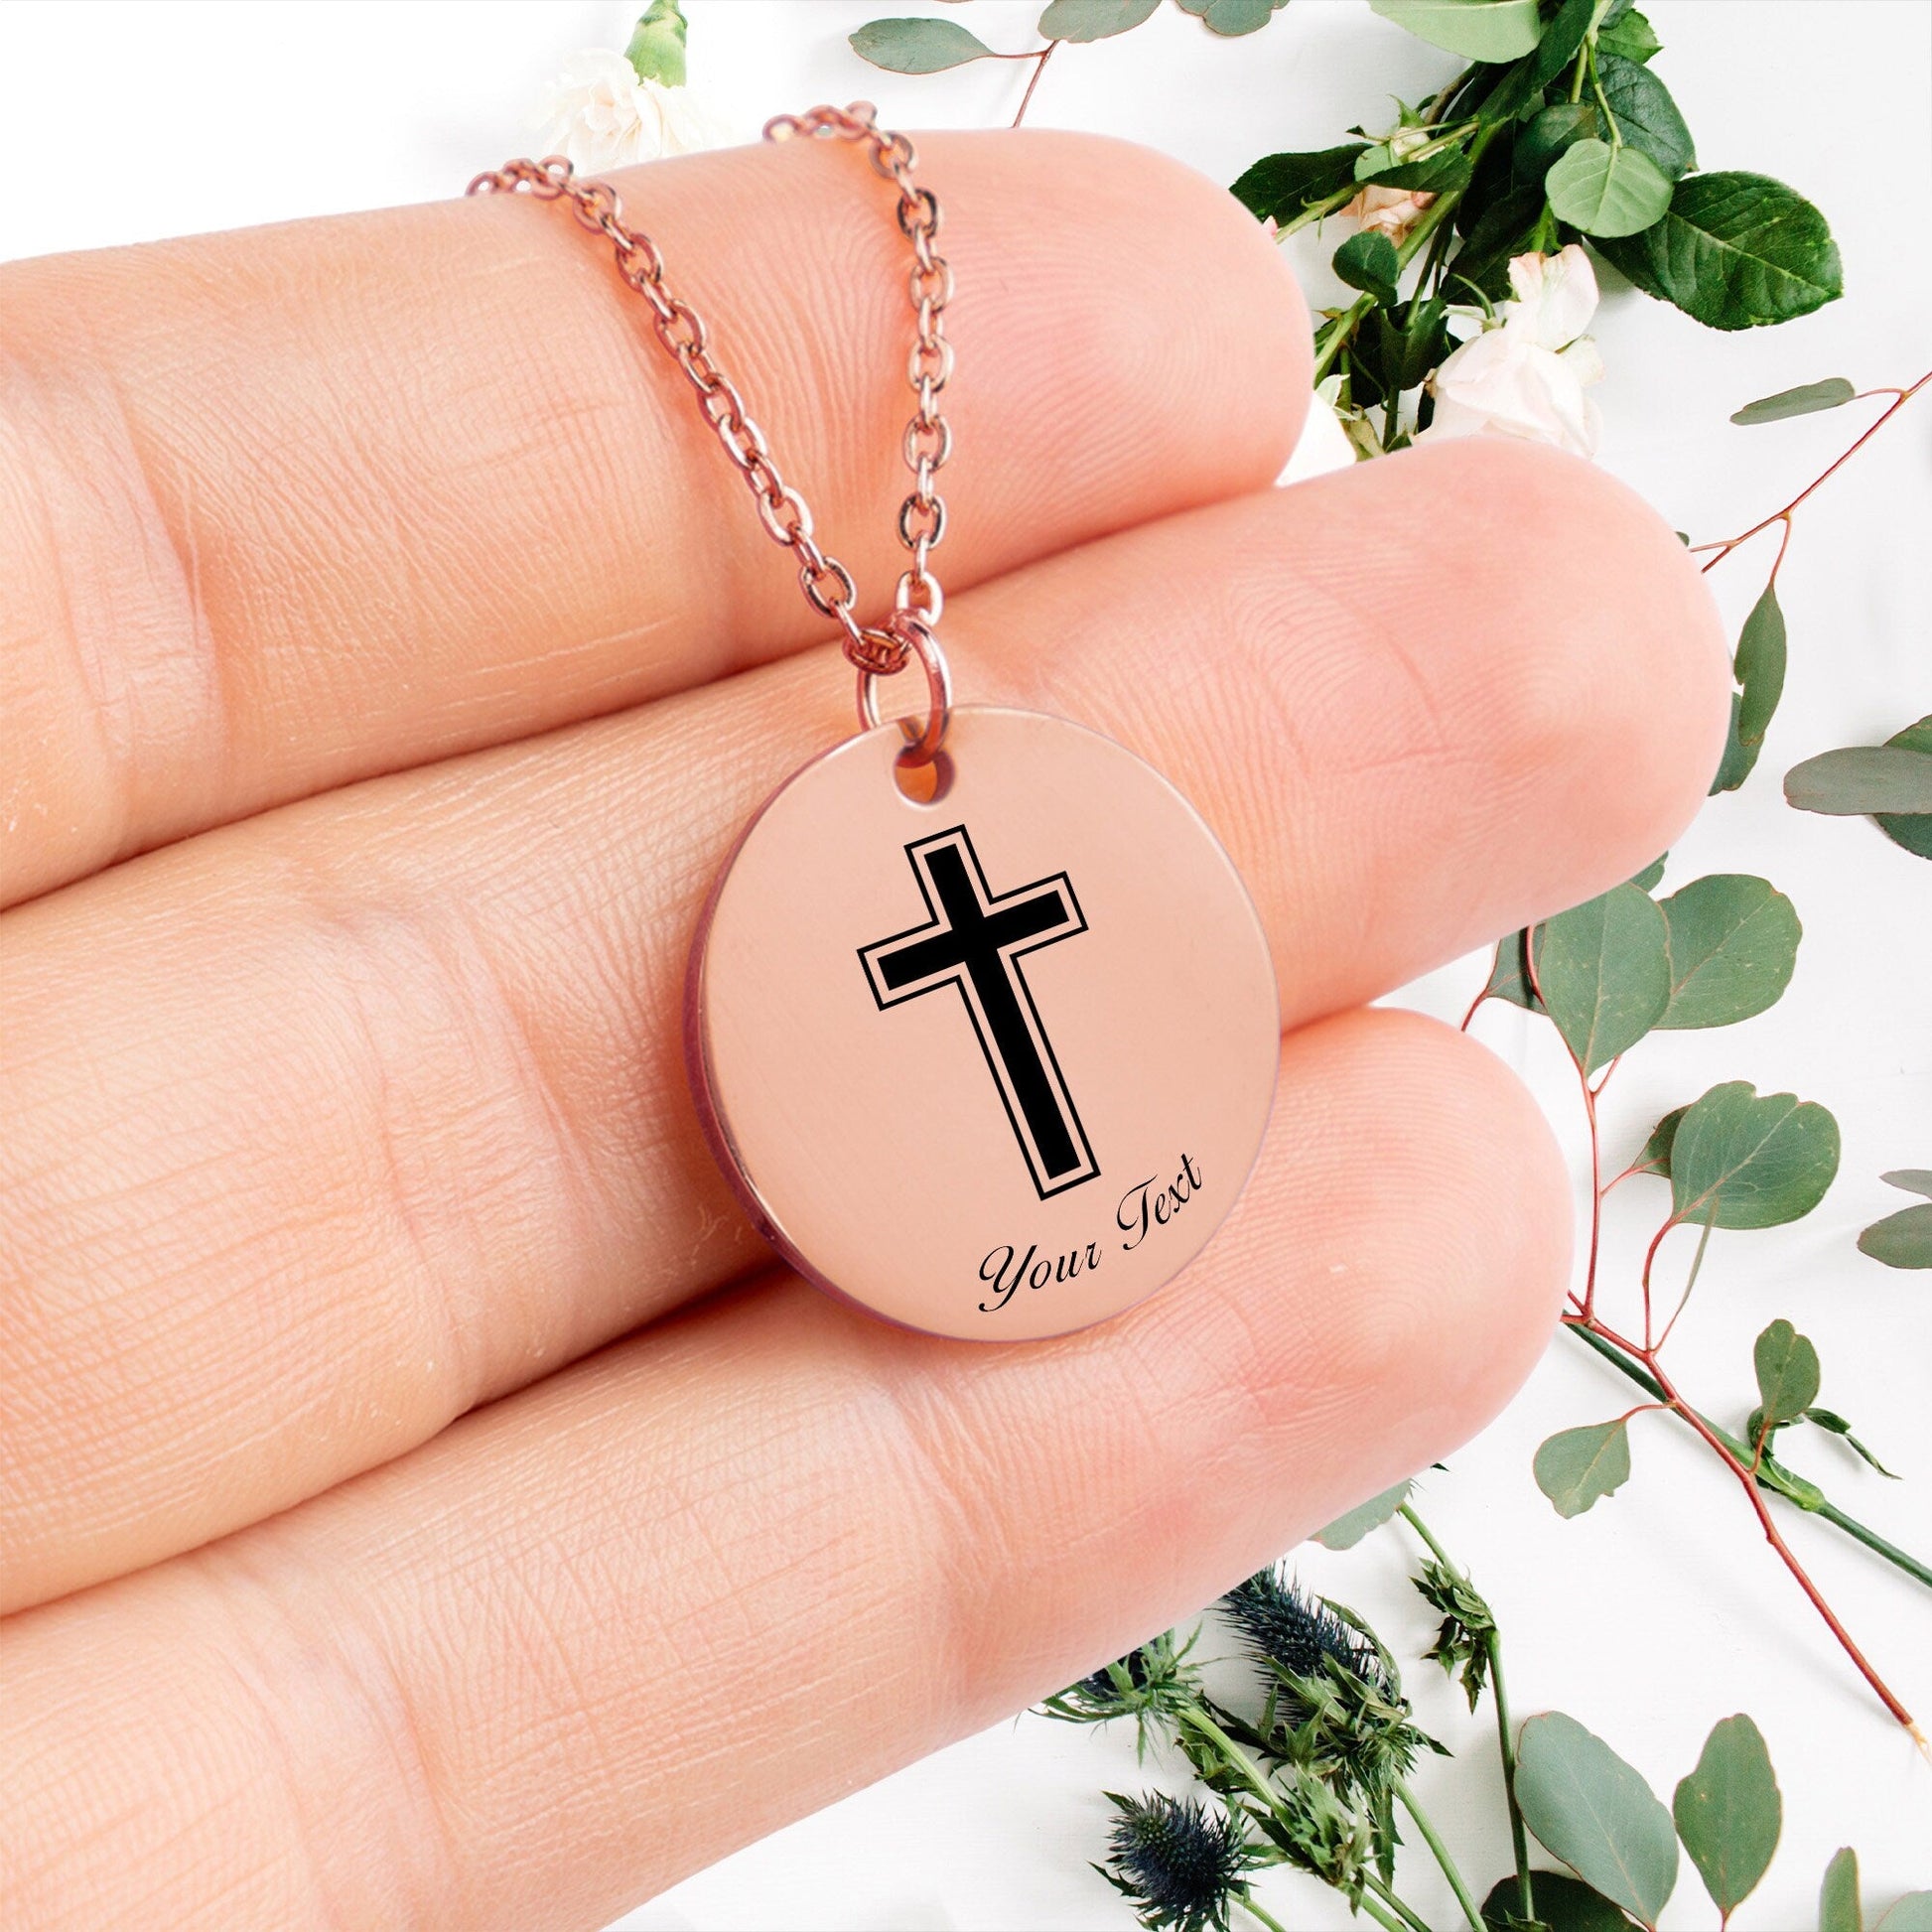 Christian Name Necklace, Your Name Necklace, Minimalist Necklace, Personalized Gift, Silver Necklace, Gift For Him Her